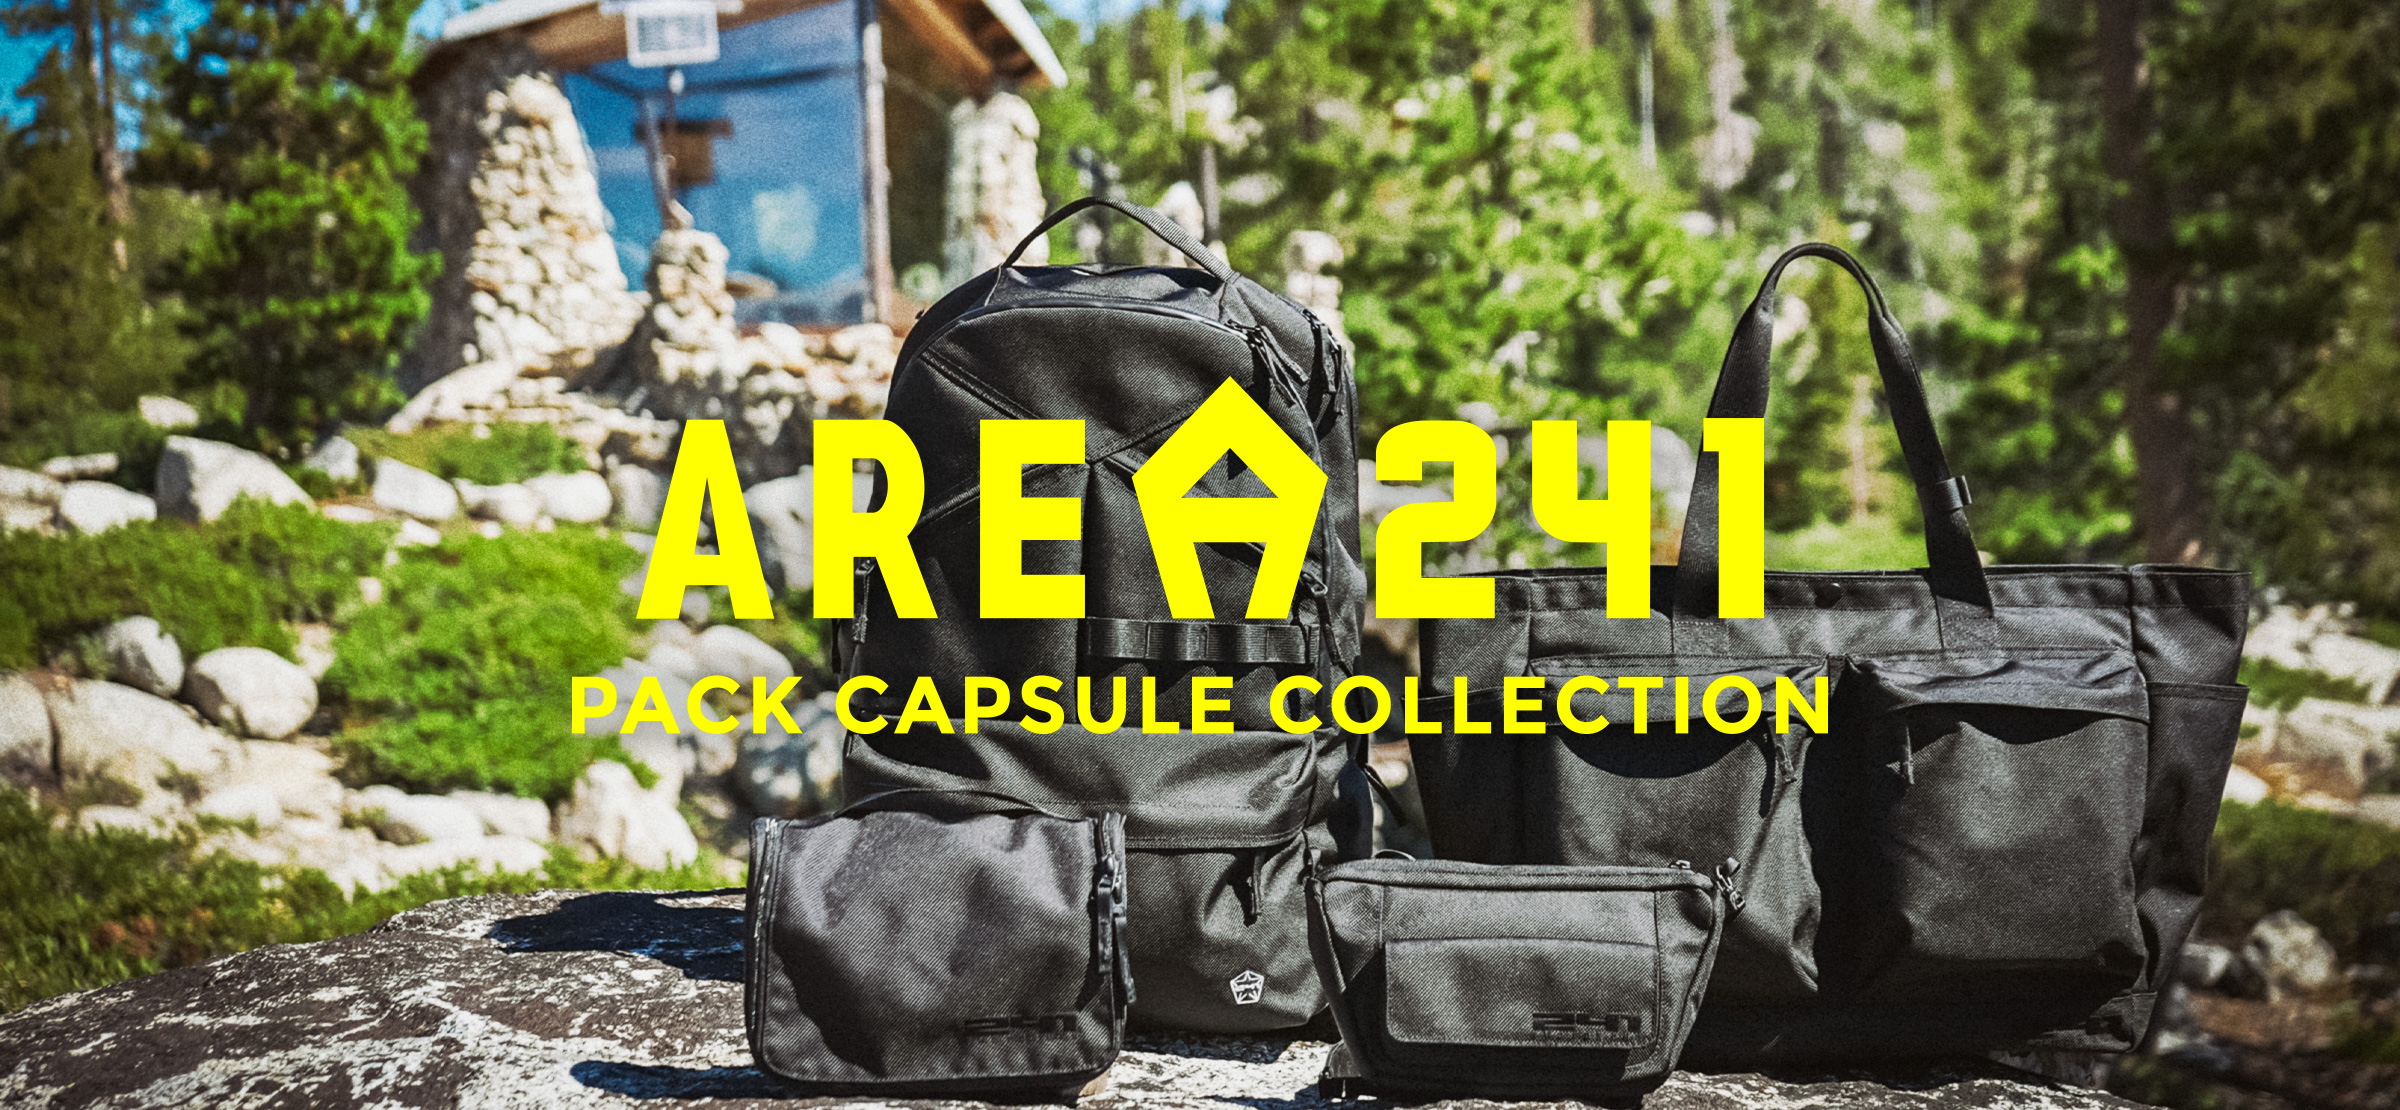 AREA241 PACK CAPSULE COLLECTION